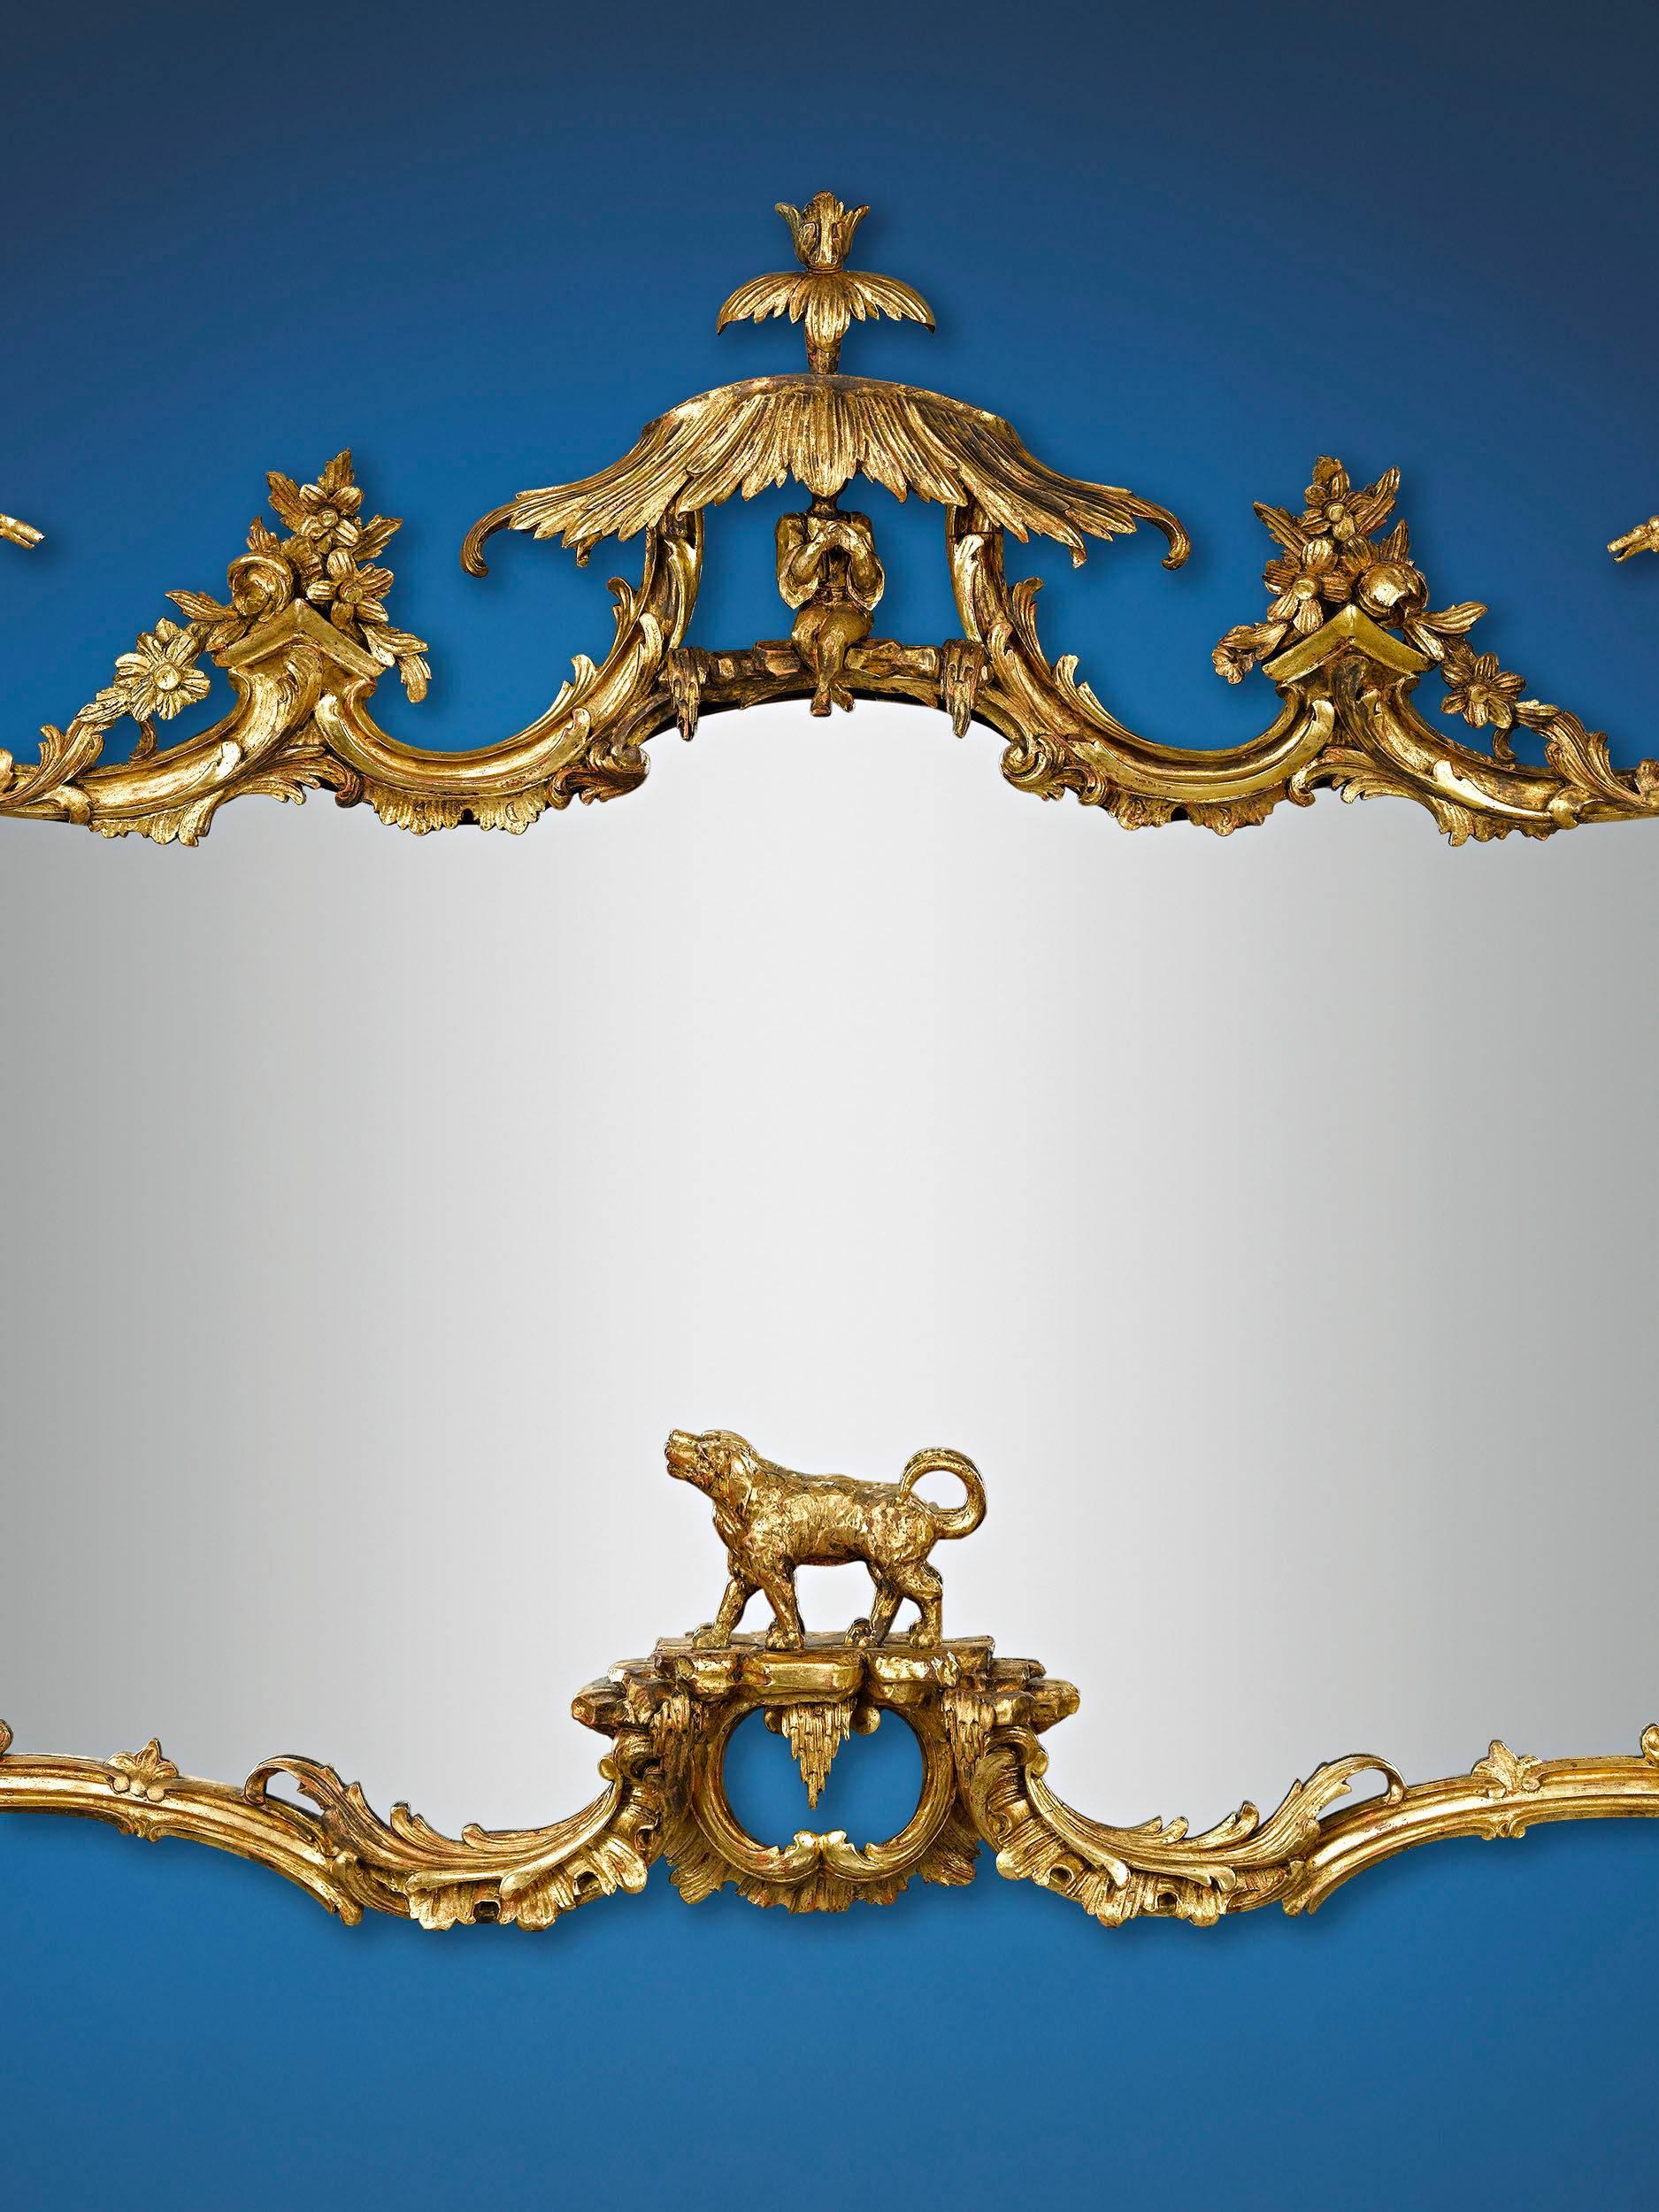 This stunning gilt looking glass is a tour-de-force of chinoiserie and Rococo style. Fashioned in the timeless 18th century style of Thomas Johnson and Thomas Chippendale, the monumental overmantle mirror is adorned by decorative motifs in the